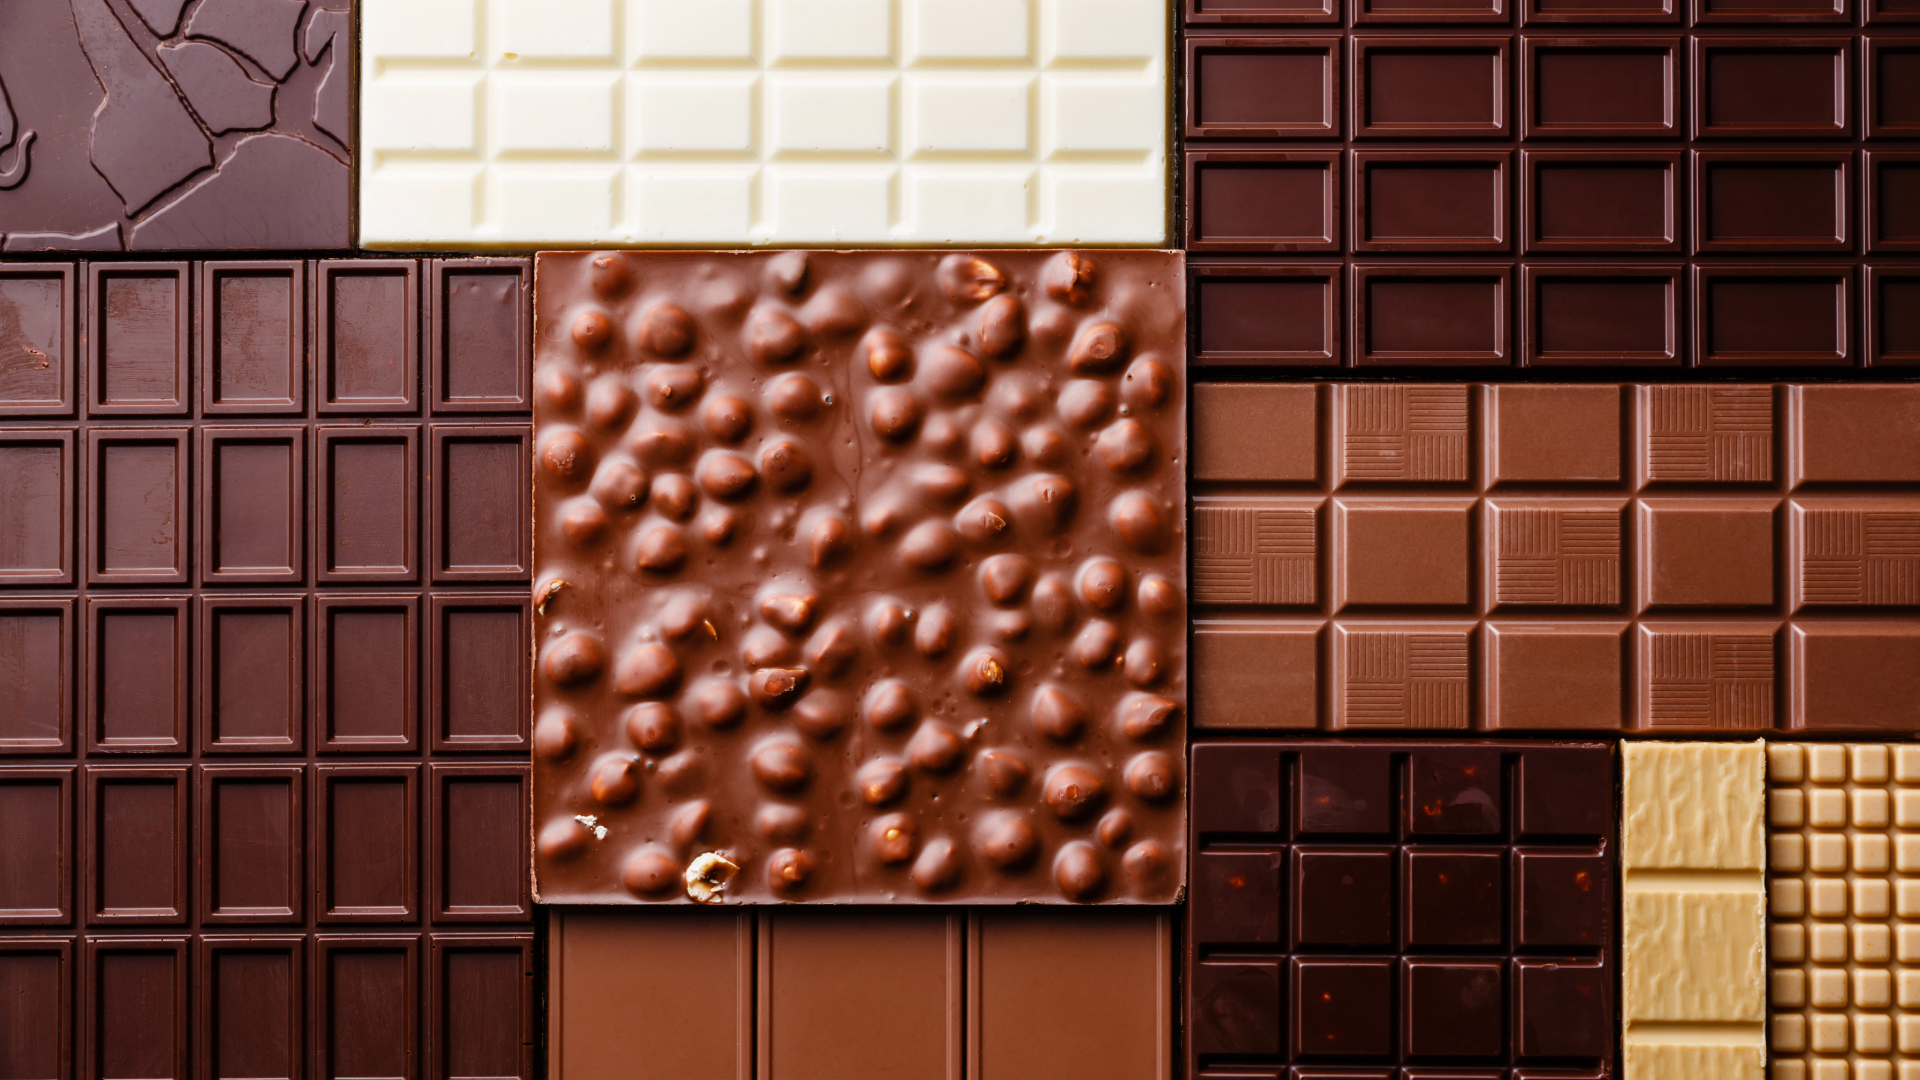 What Is the Difference Between Unsweetened Chocolate, Semisweet Chocolate, and Sweet Chocolate?